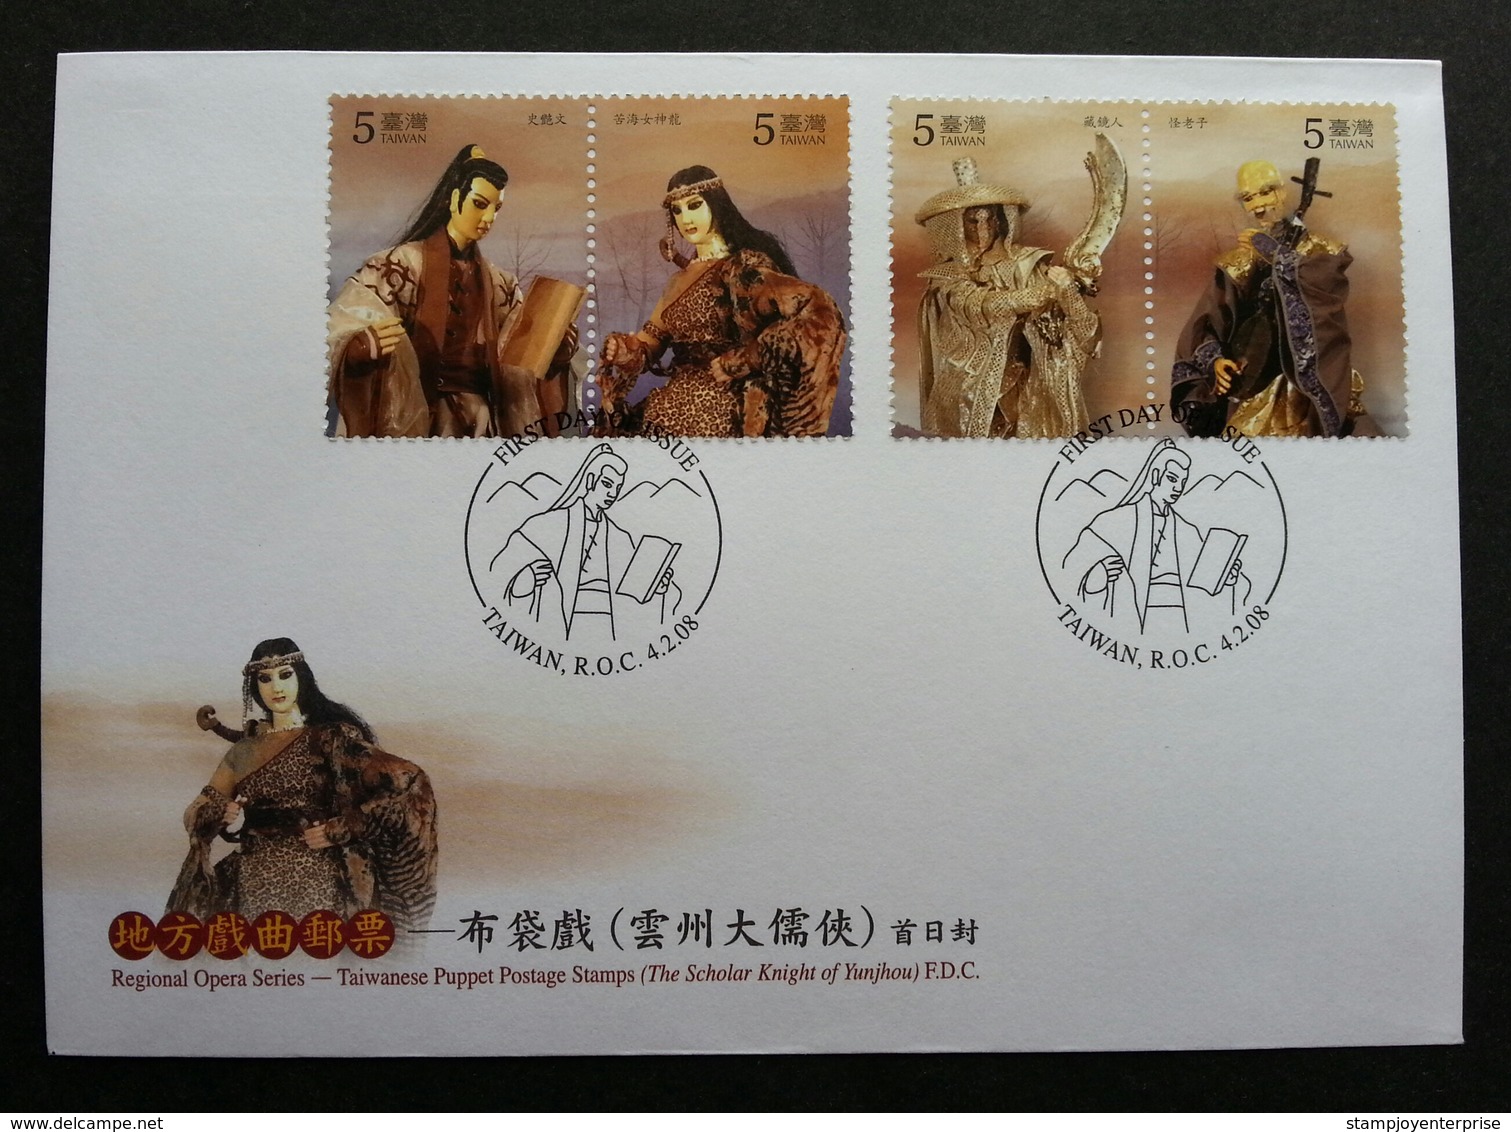 Taiwan Regional Opera Series Puppet 2008 Chinese Art (FDC) - Covers & Documents